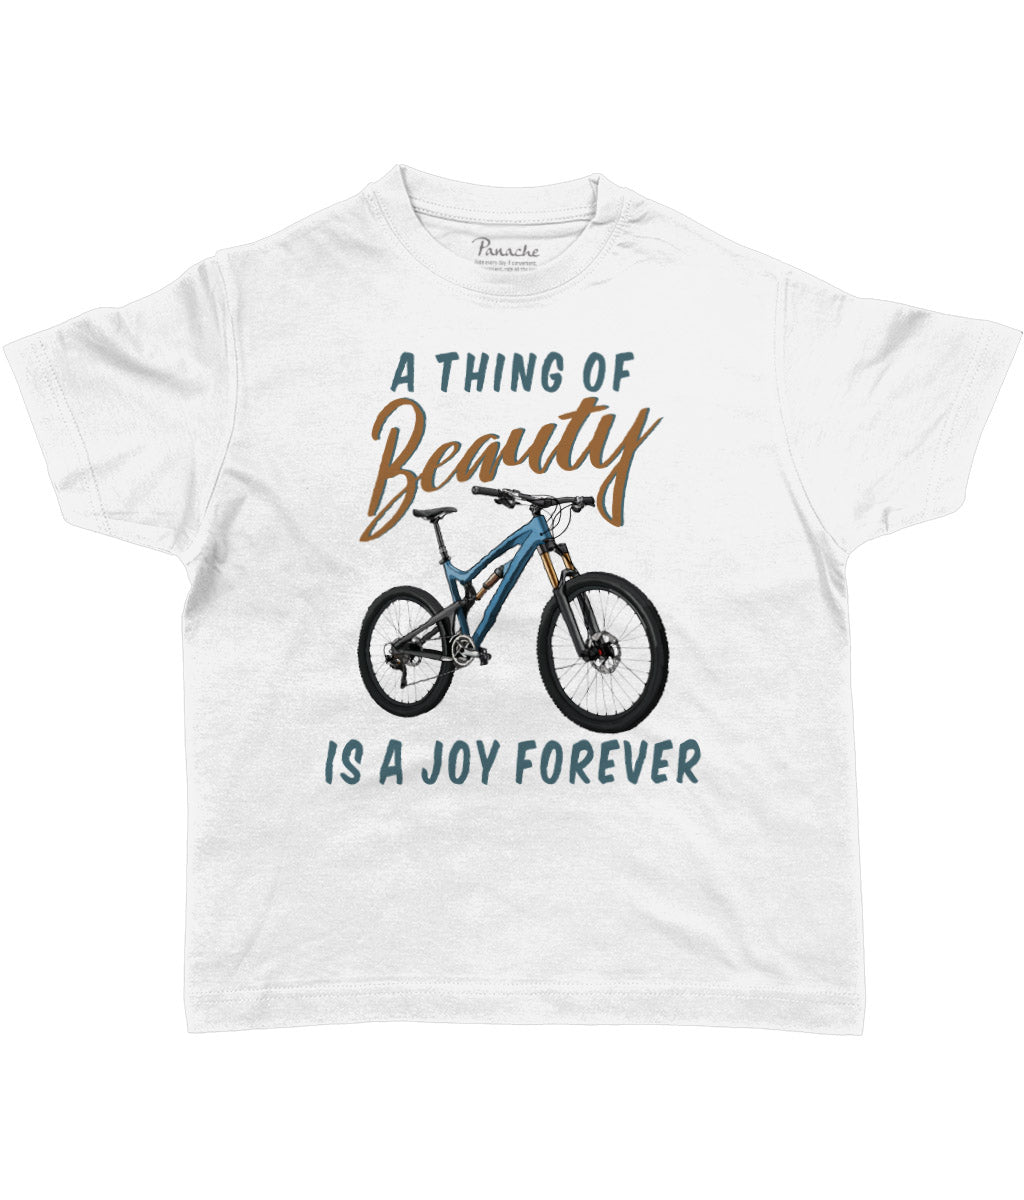 A Thing of Beauty is a Joy Forever Kids Cycling T-shirt White